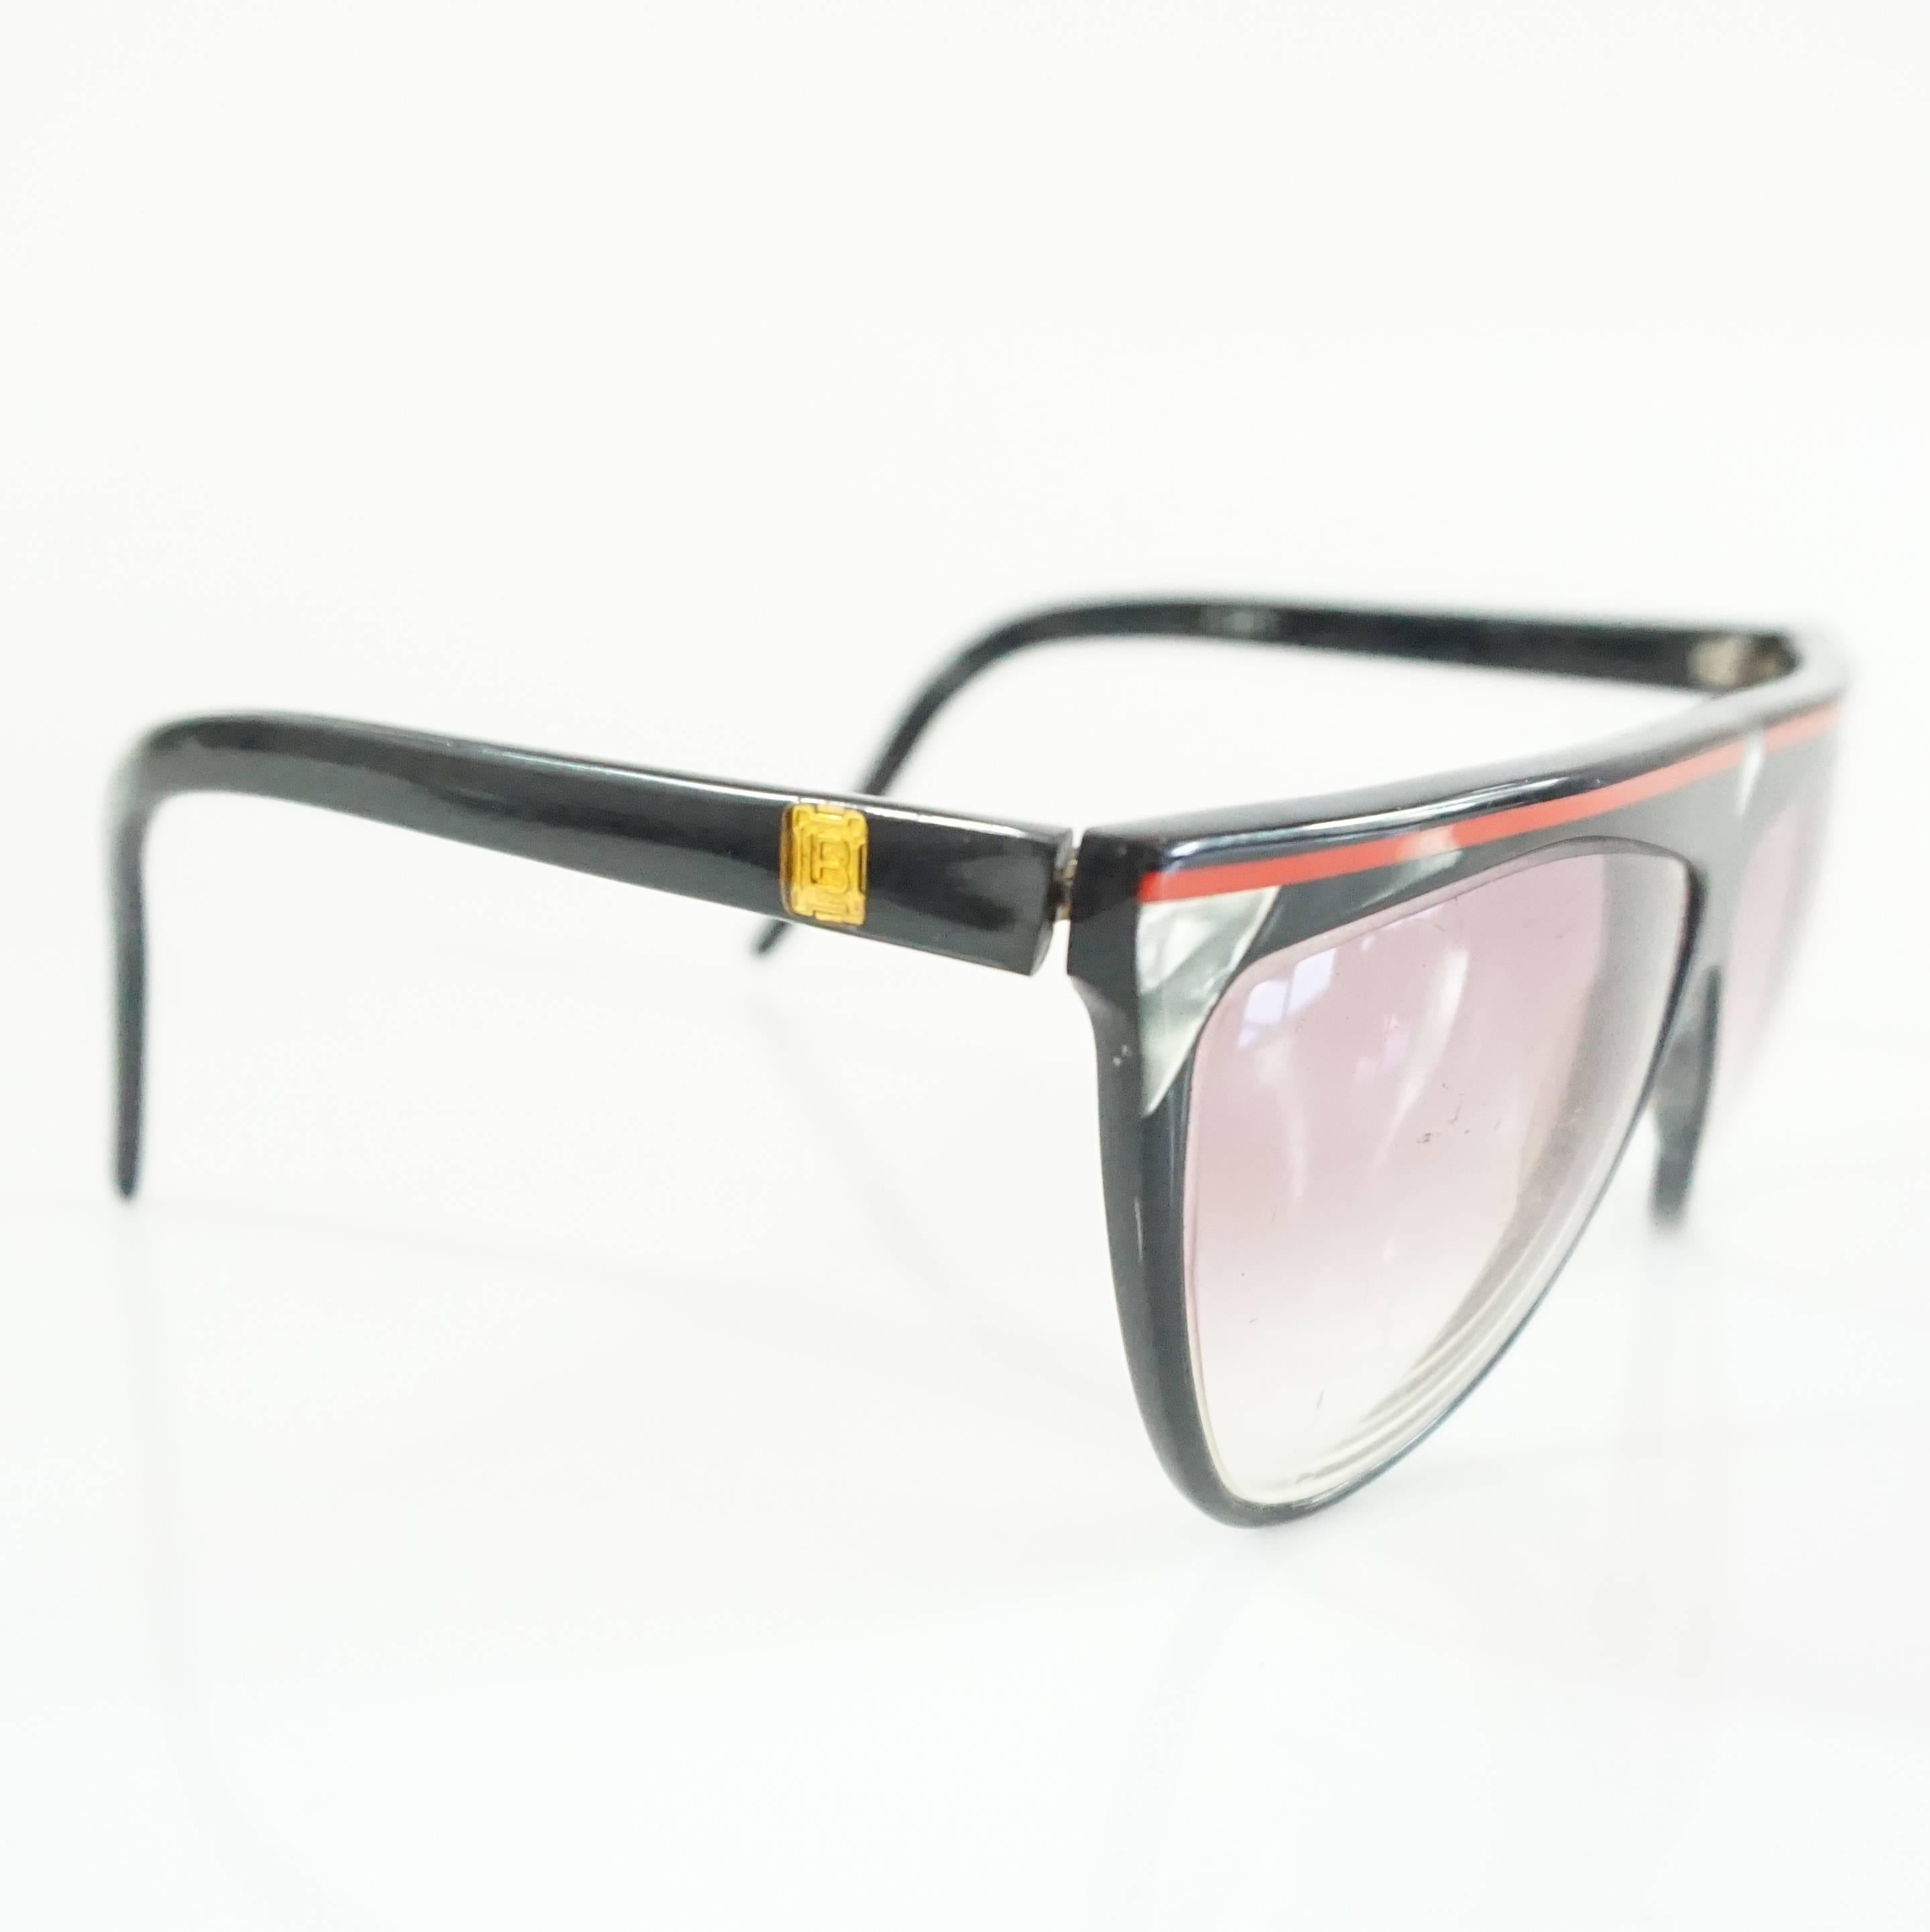 Beige Laura Biagiotti Black Sunglasses with Red Detailing